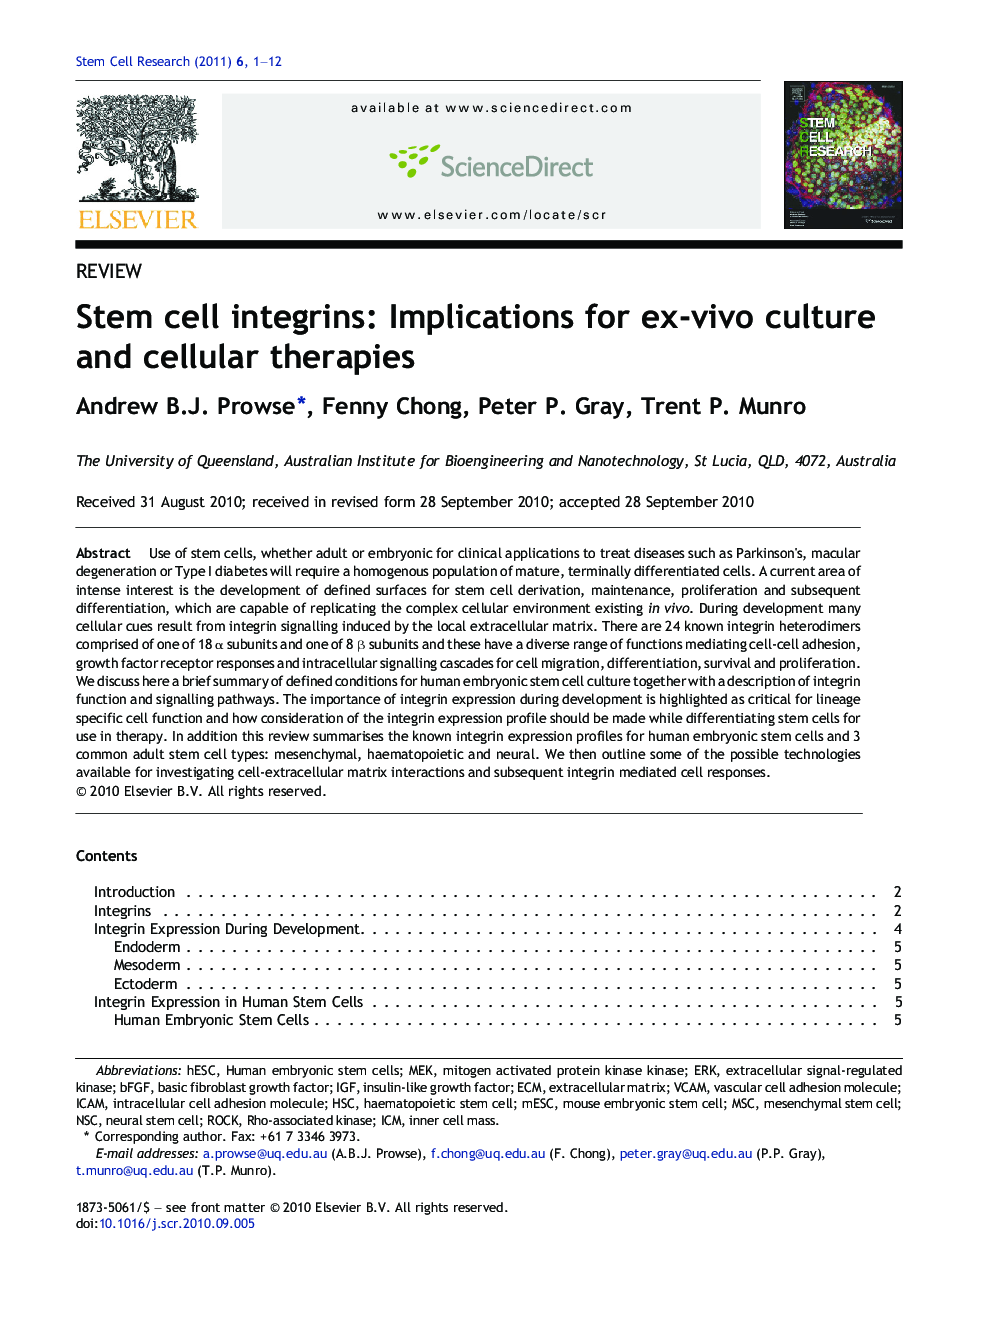 Stem cell integrins: Implications for ex-vivo culture and cellular therapies